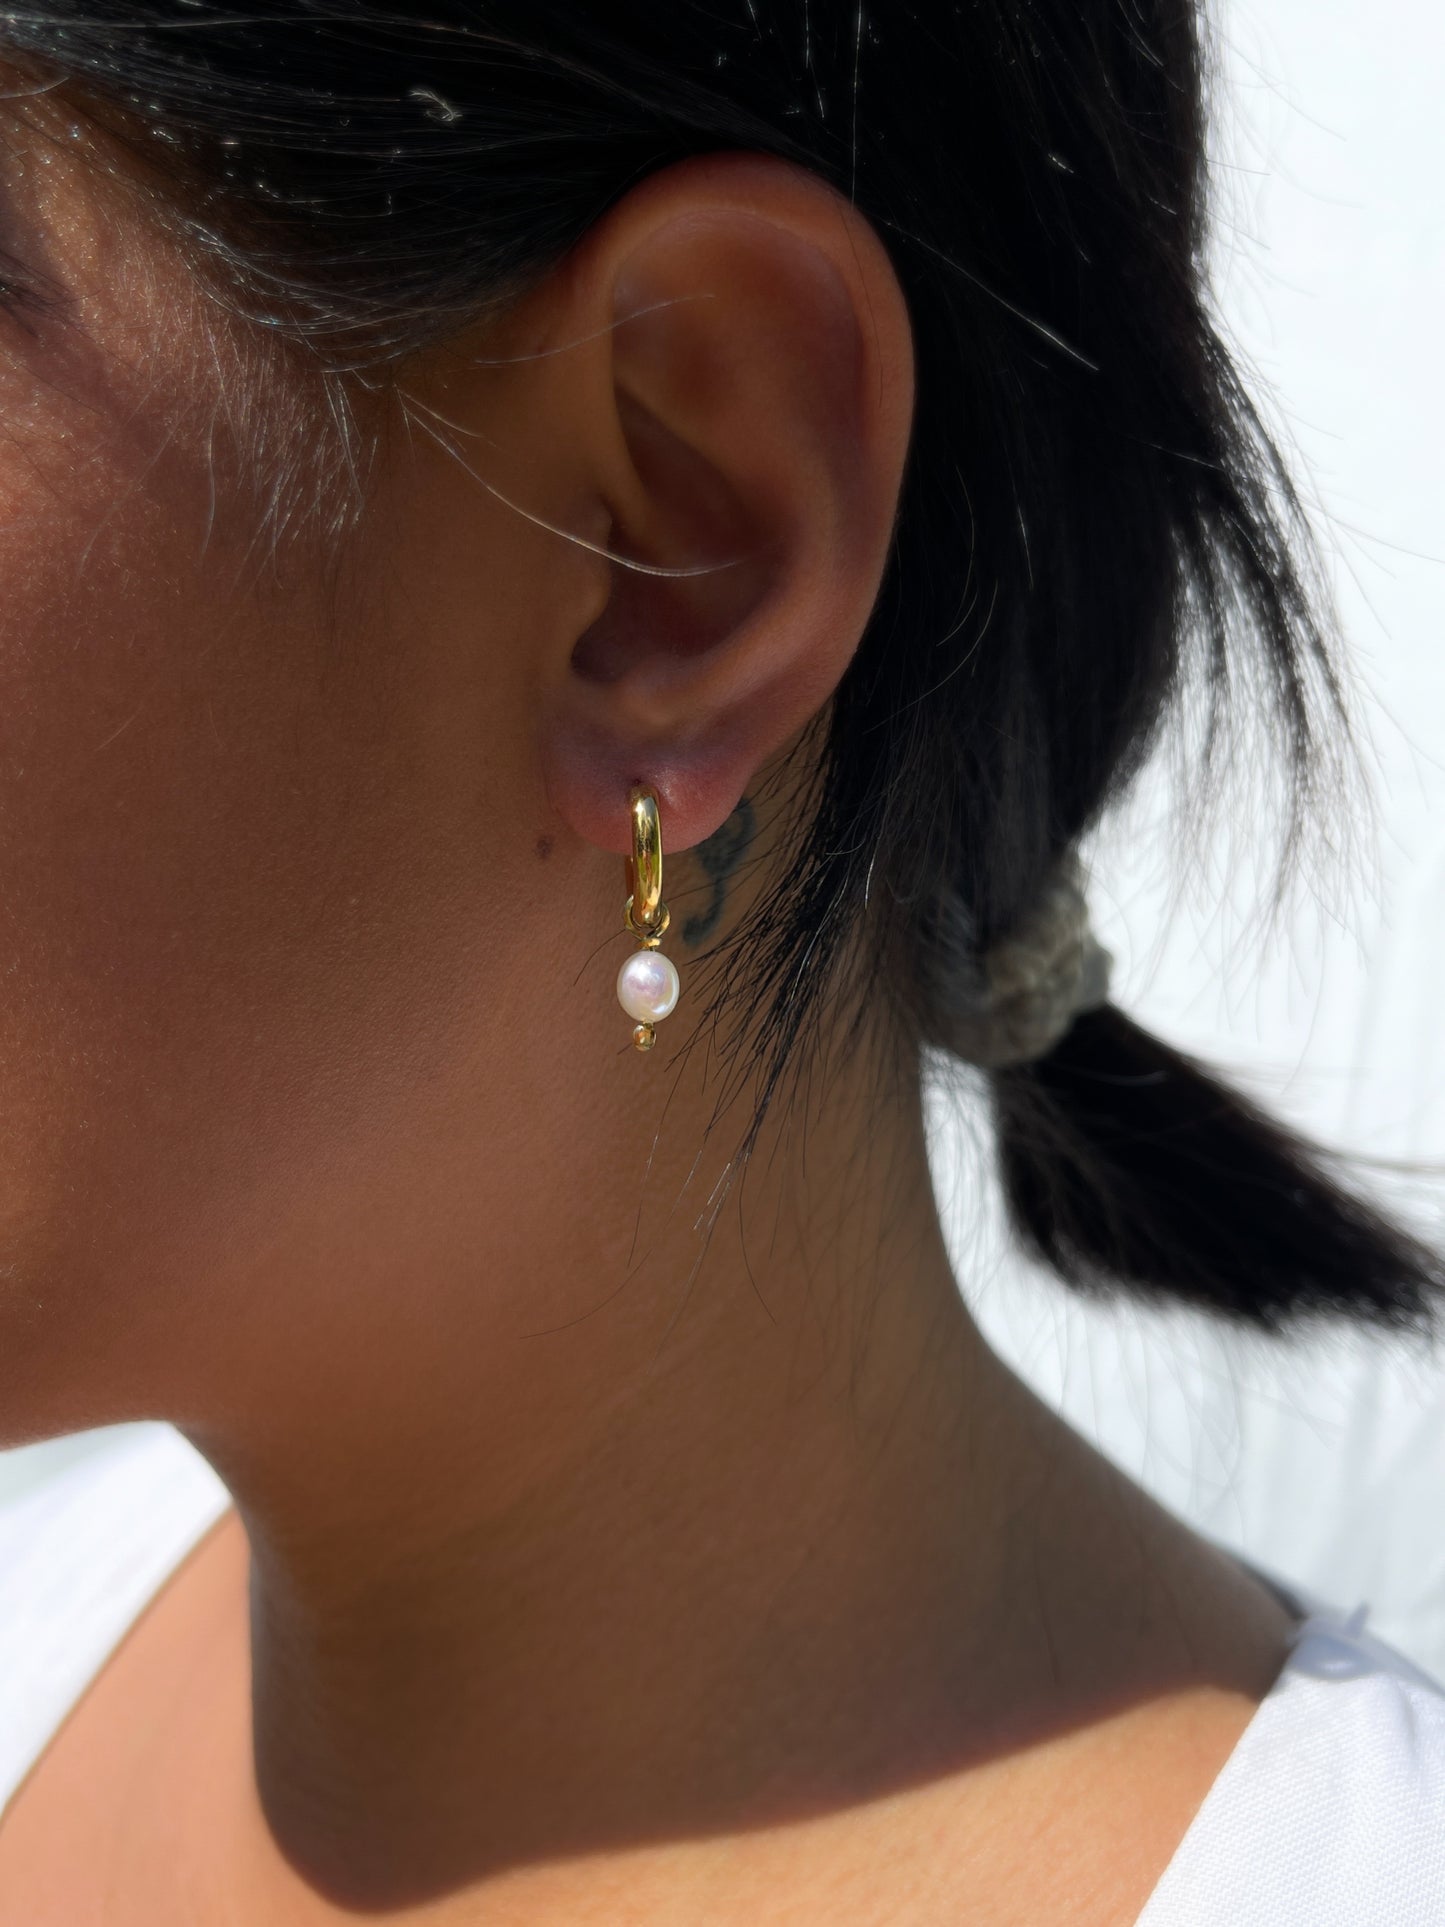 Biwa Pearl Gold Hoops. Chunky 18 karat Gold filled hoops, suspends both elongated Biwa, and round, natural AAA quality freshwater pearls, in a minimal asymmetrical design. Designed and made by nāmaka